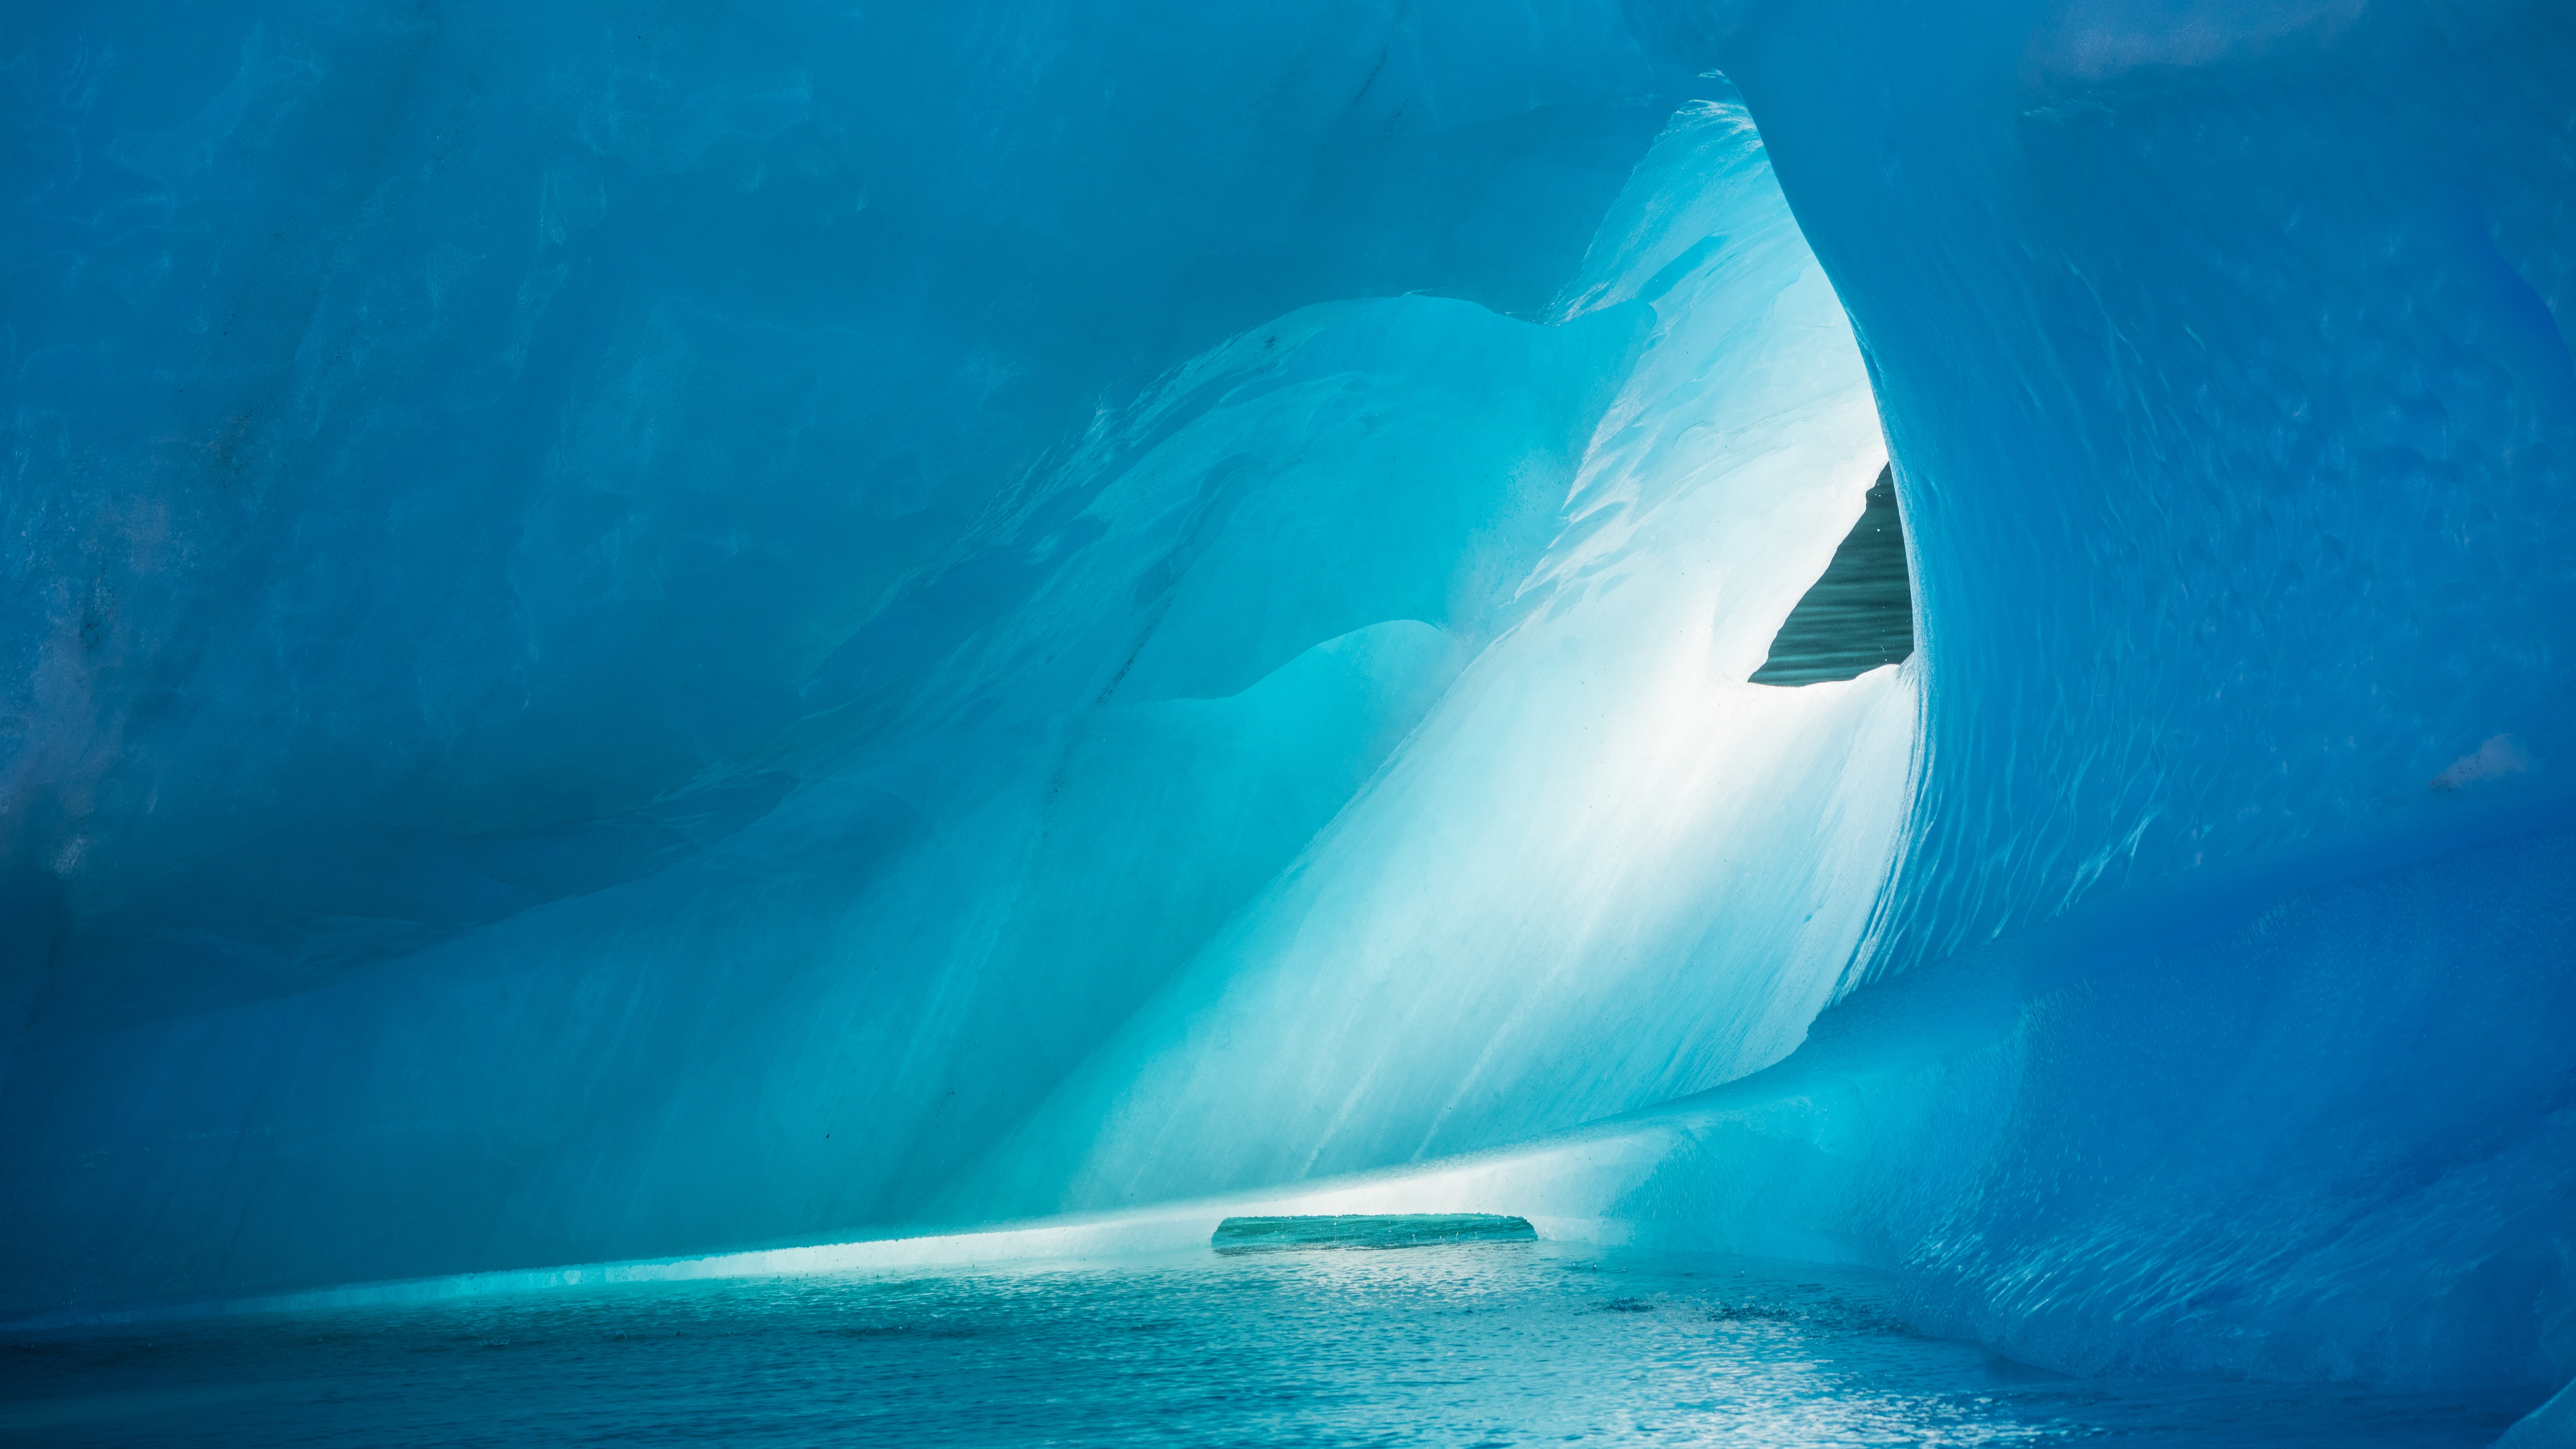 nature, water, ice, cave, ice floes